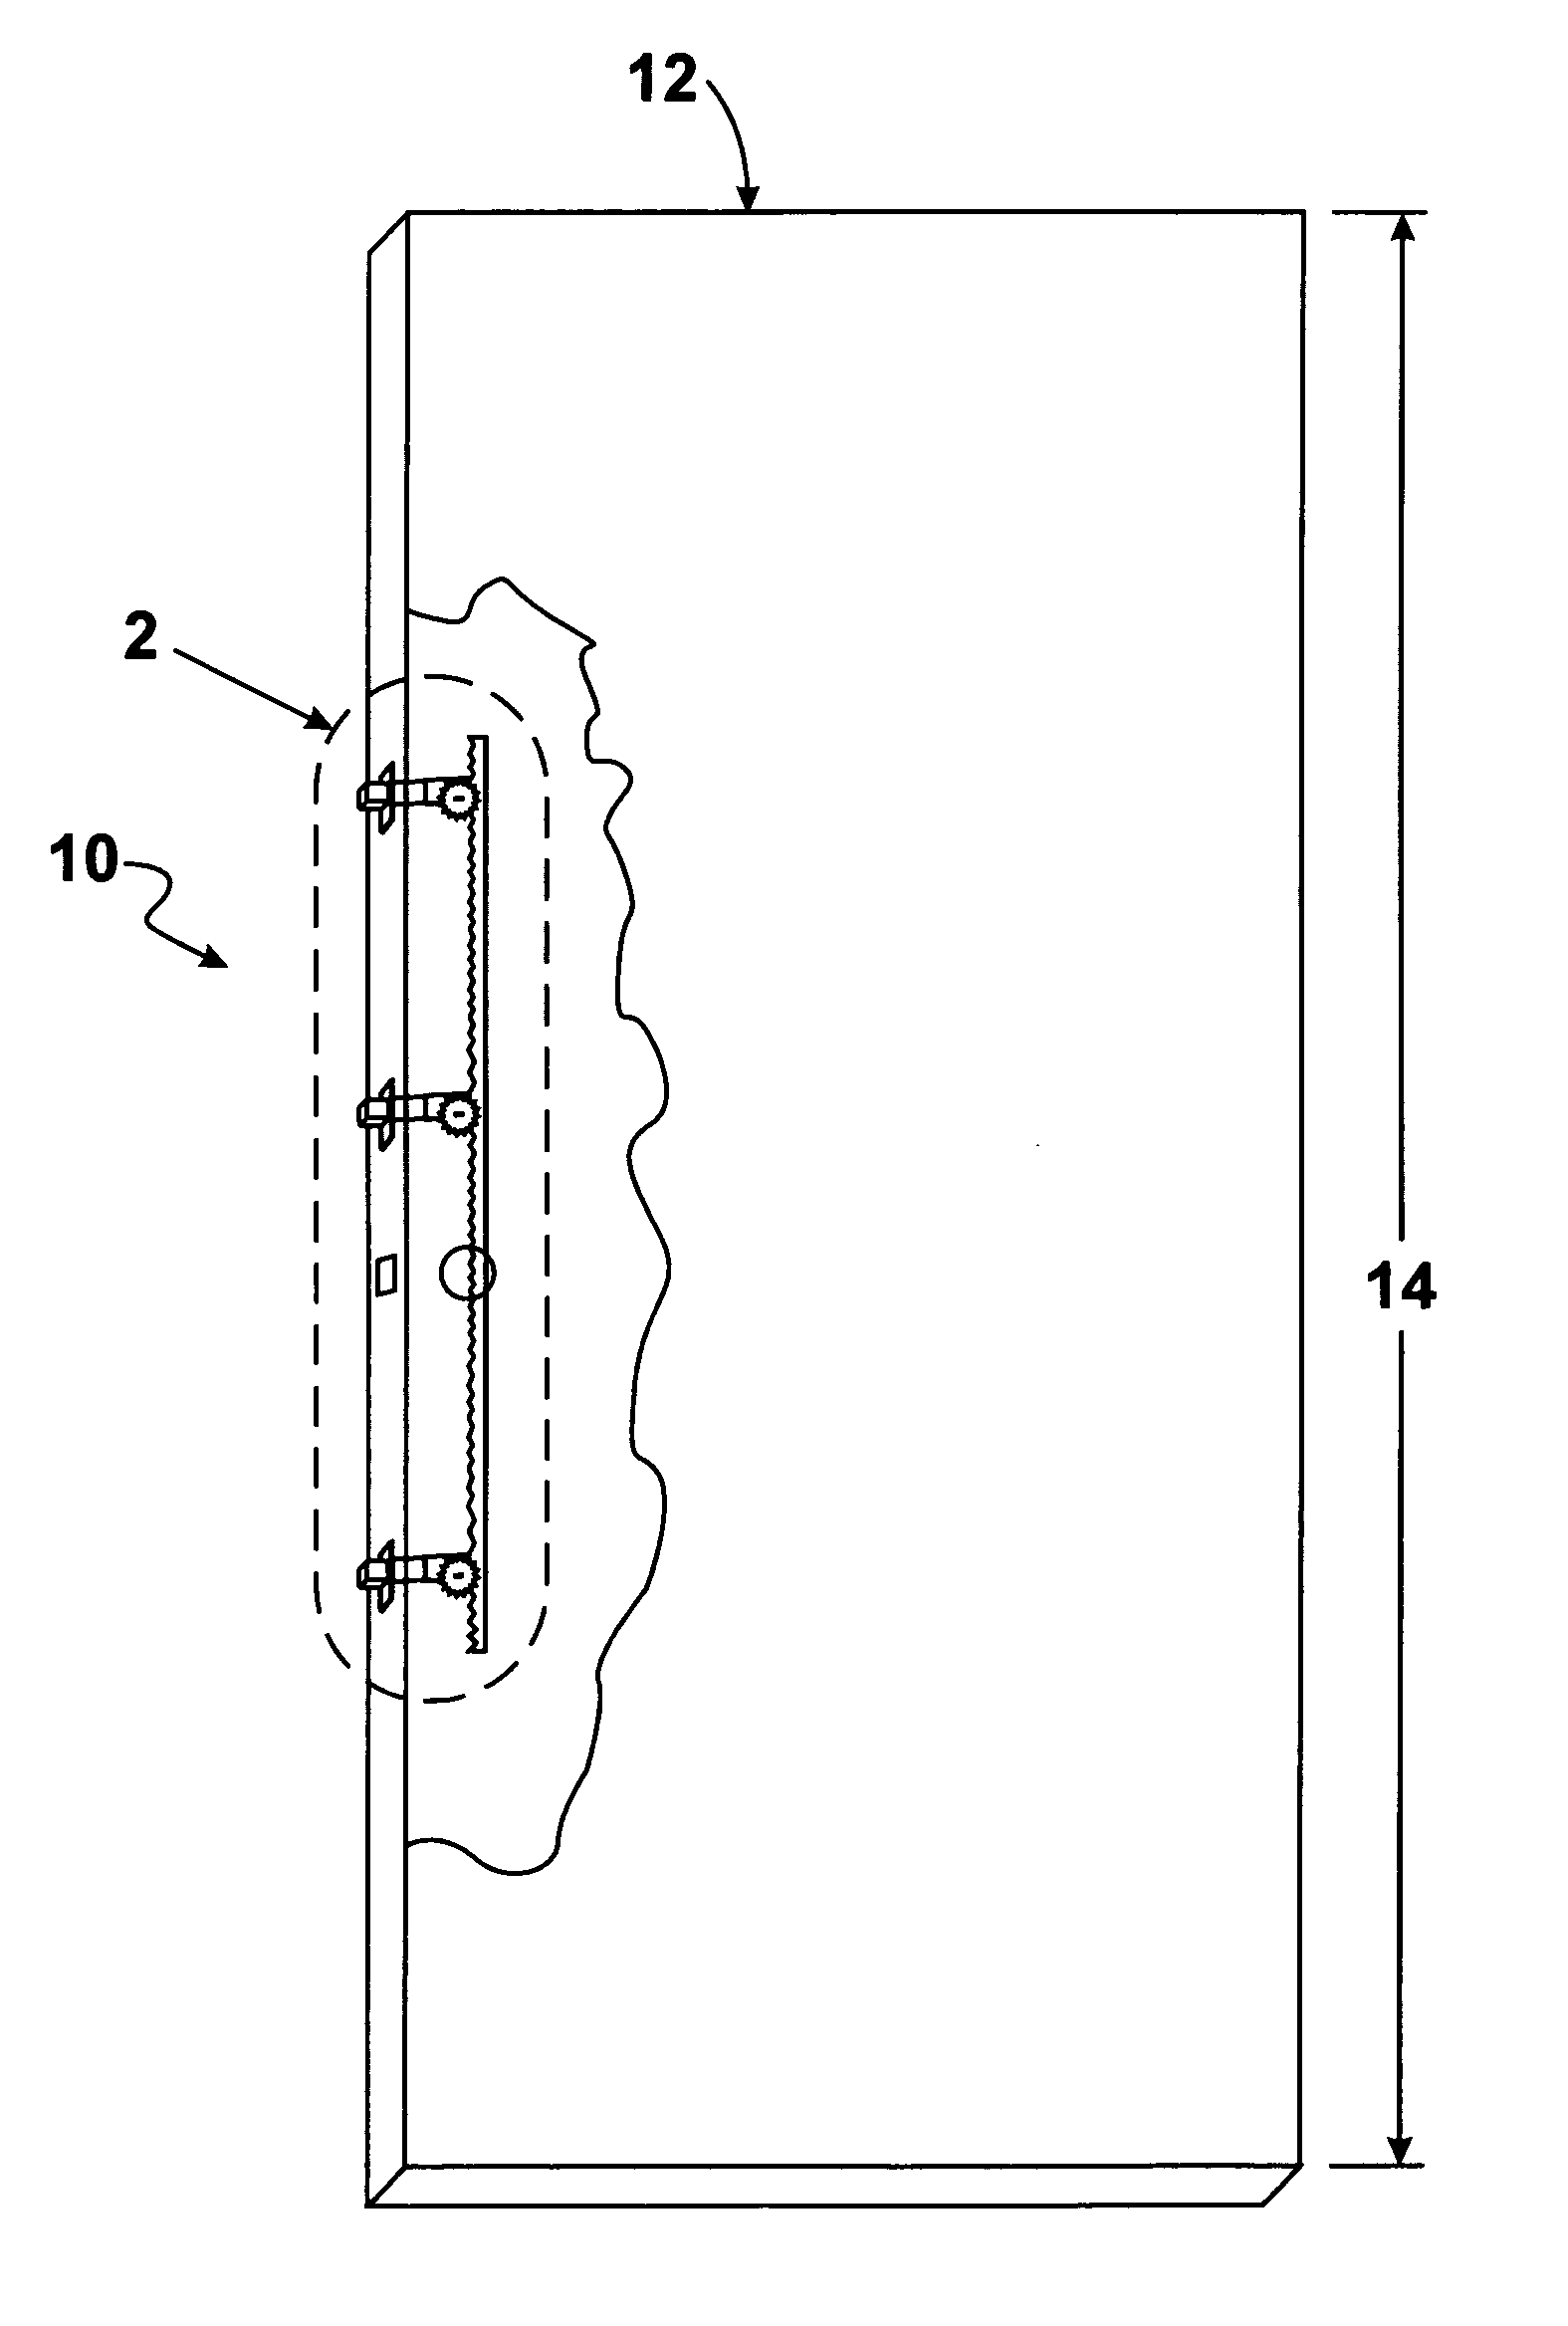 Lock system for integrating into an entry door having a vertical expanse and providing simultaneous multi-point locking along the vertical expanse of the entry door